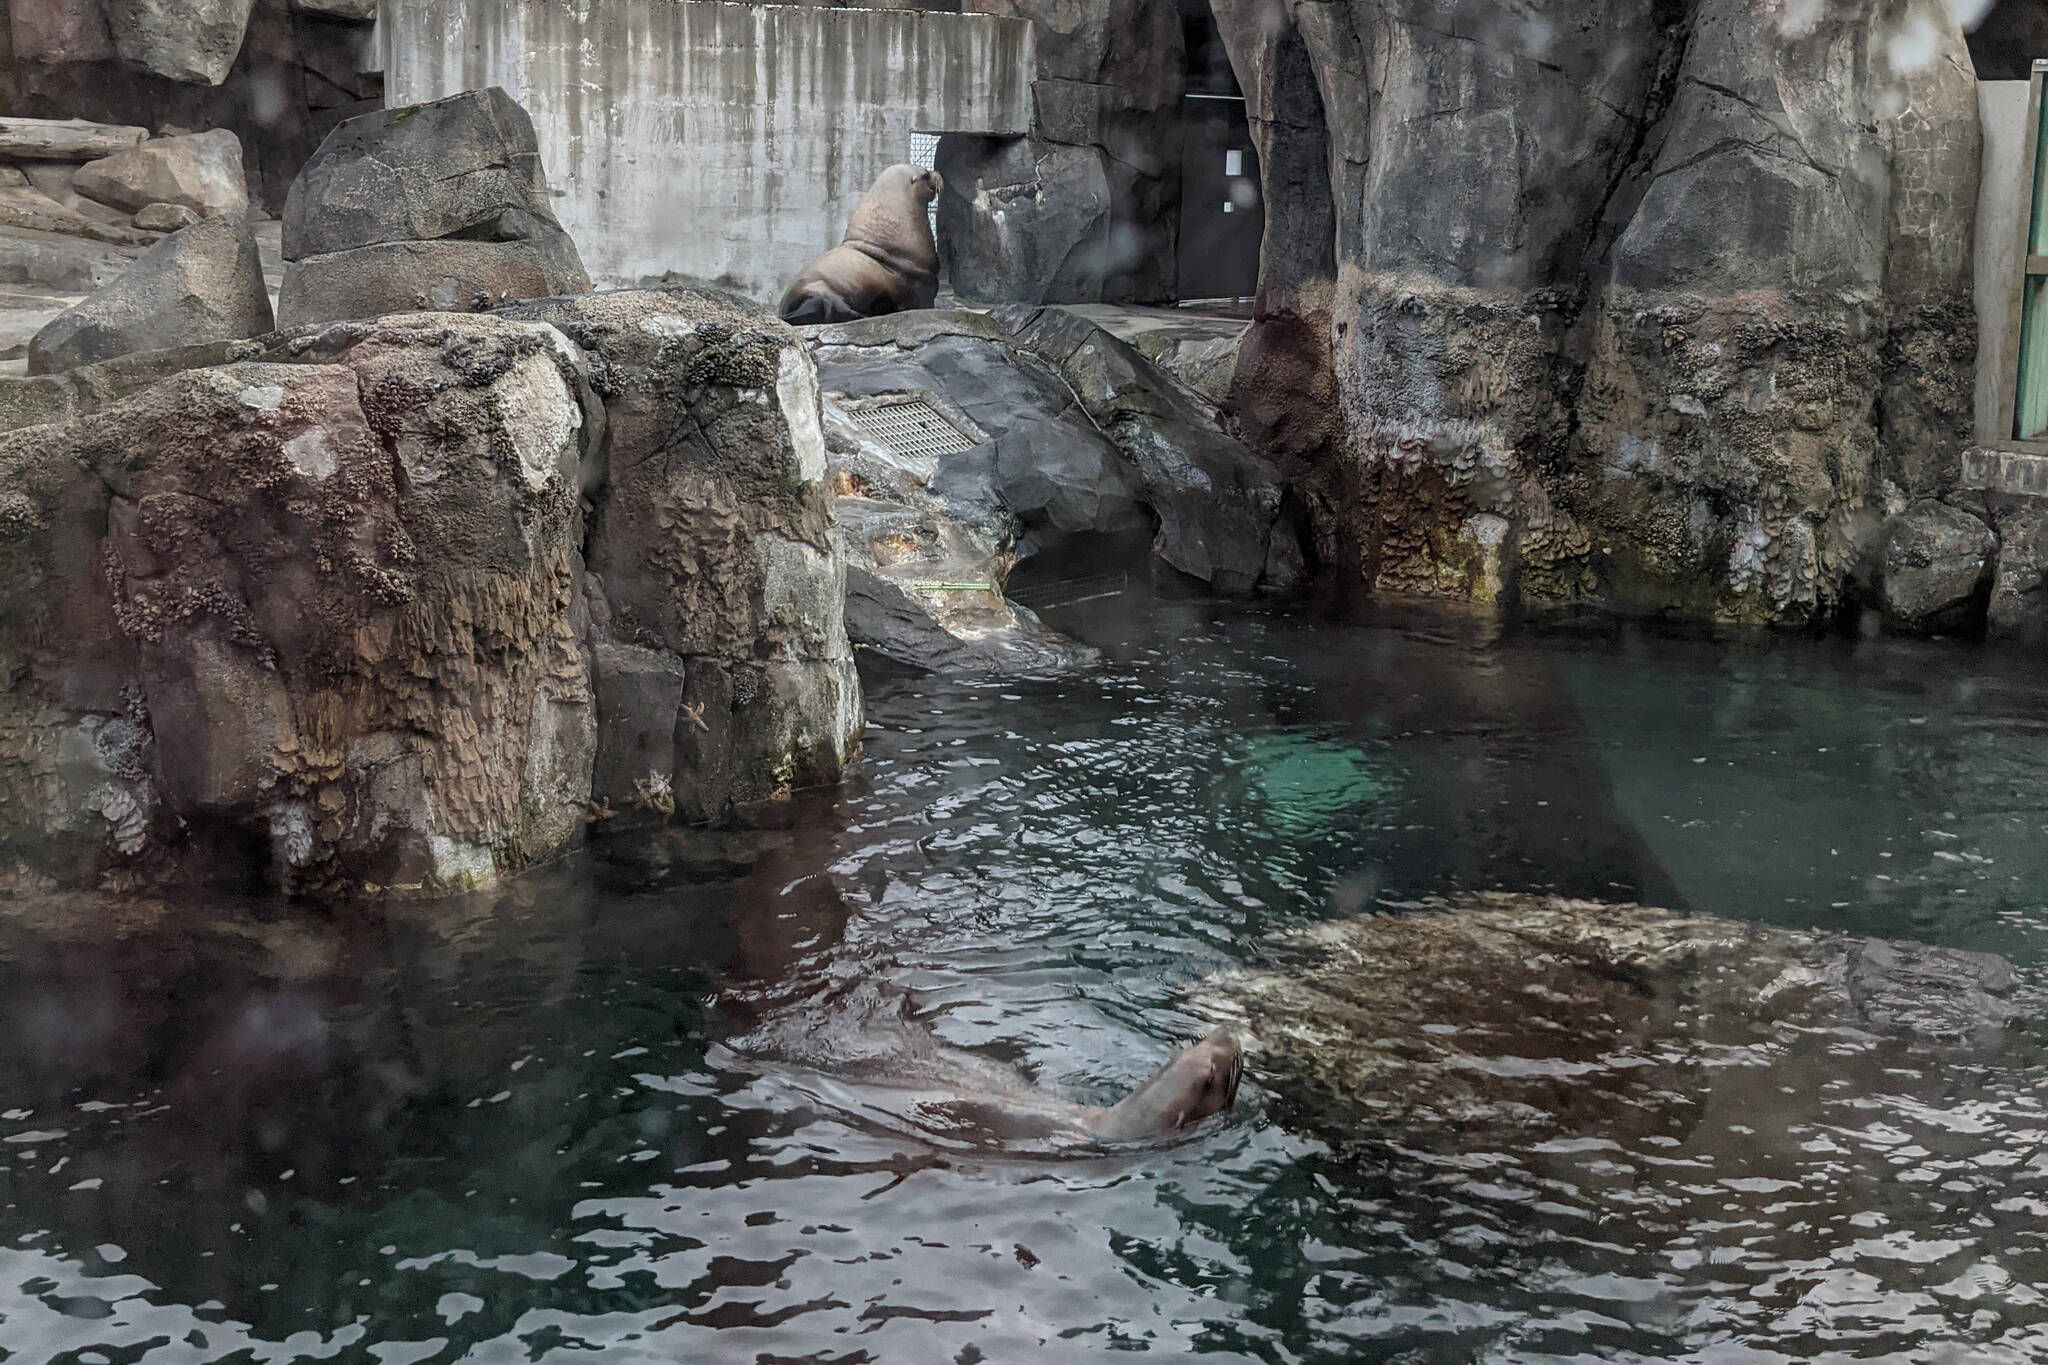 Steller Sea Lions can be seen in an enclosure at the Alaska SeaLife Center on Friday, Sept. 24, 2021, in Seward, Alaska. (Photo by Erin Thompson/Peninsula Clarion)